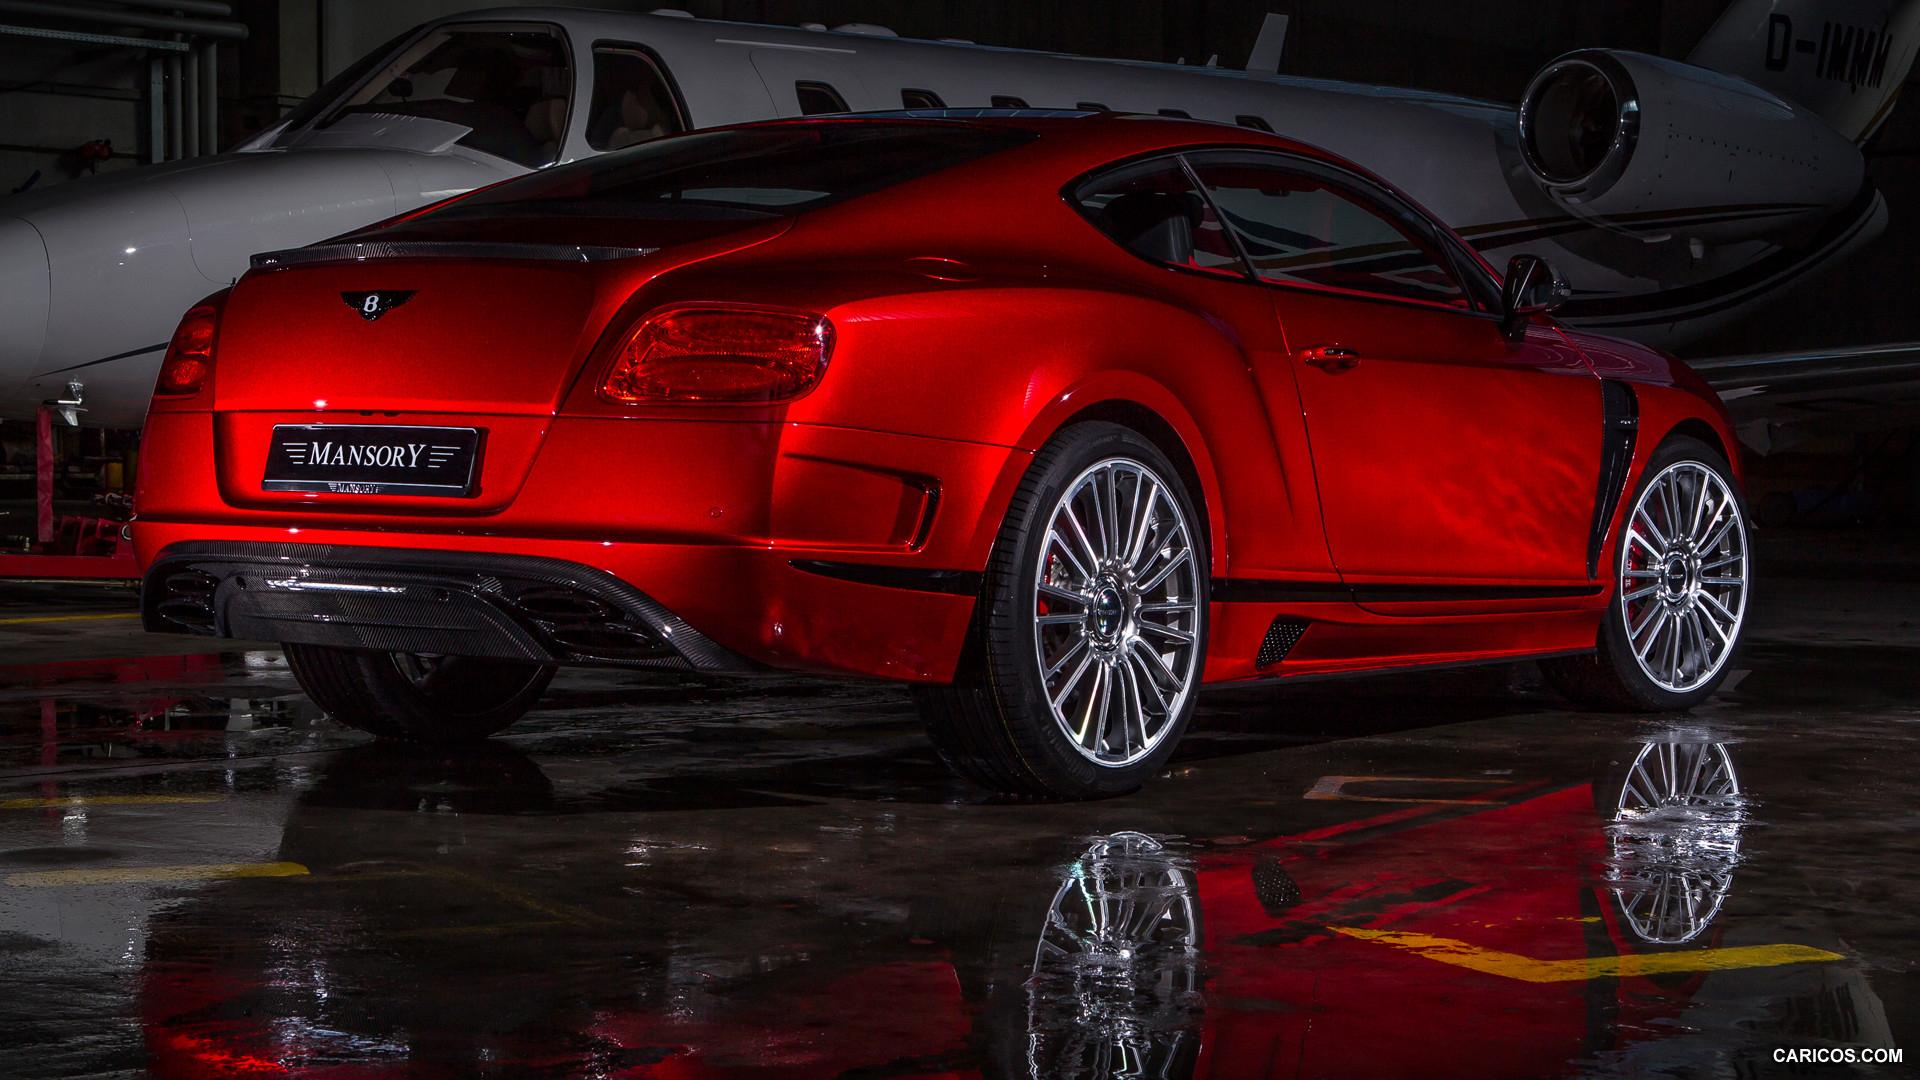 2013 Mansory Sanguis based on Bentley Continental GT  - Rear, #4 of 7